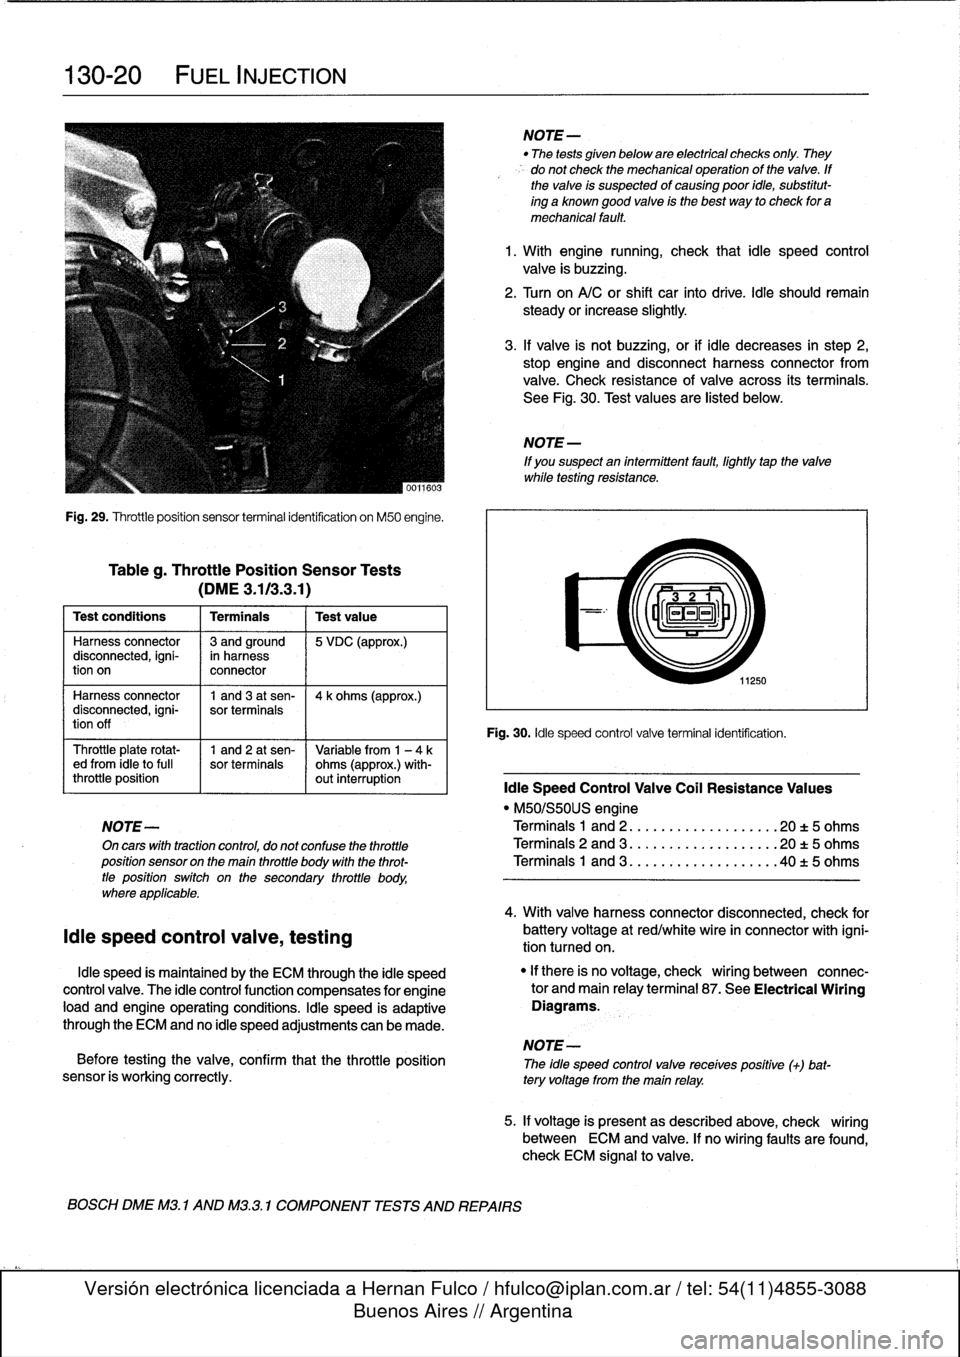 BMW 325i 1993 E36 Workshop Manual 
130-20

	

FUEL
INJECTION

Fig
.
29
.
Throttleposition
sensor
terminal
identification
on
M50
engine
.

Tableg
.
Throttle
Position
Sensor
Tests

(DME3
.113
.3
.1)

Test
conditions

	

I
Terminals

	

